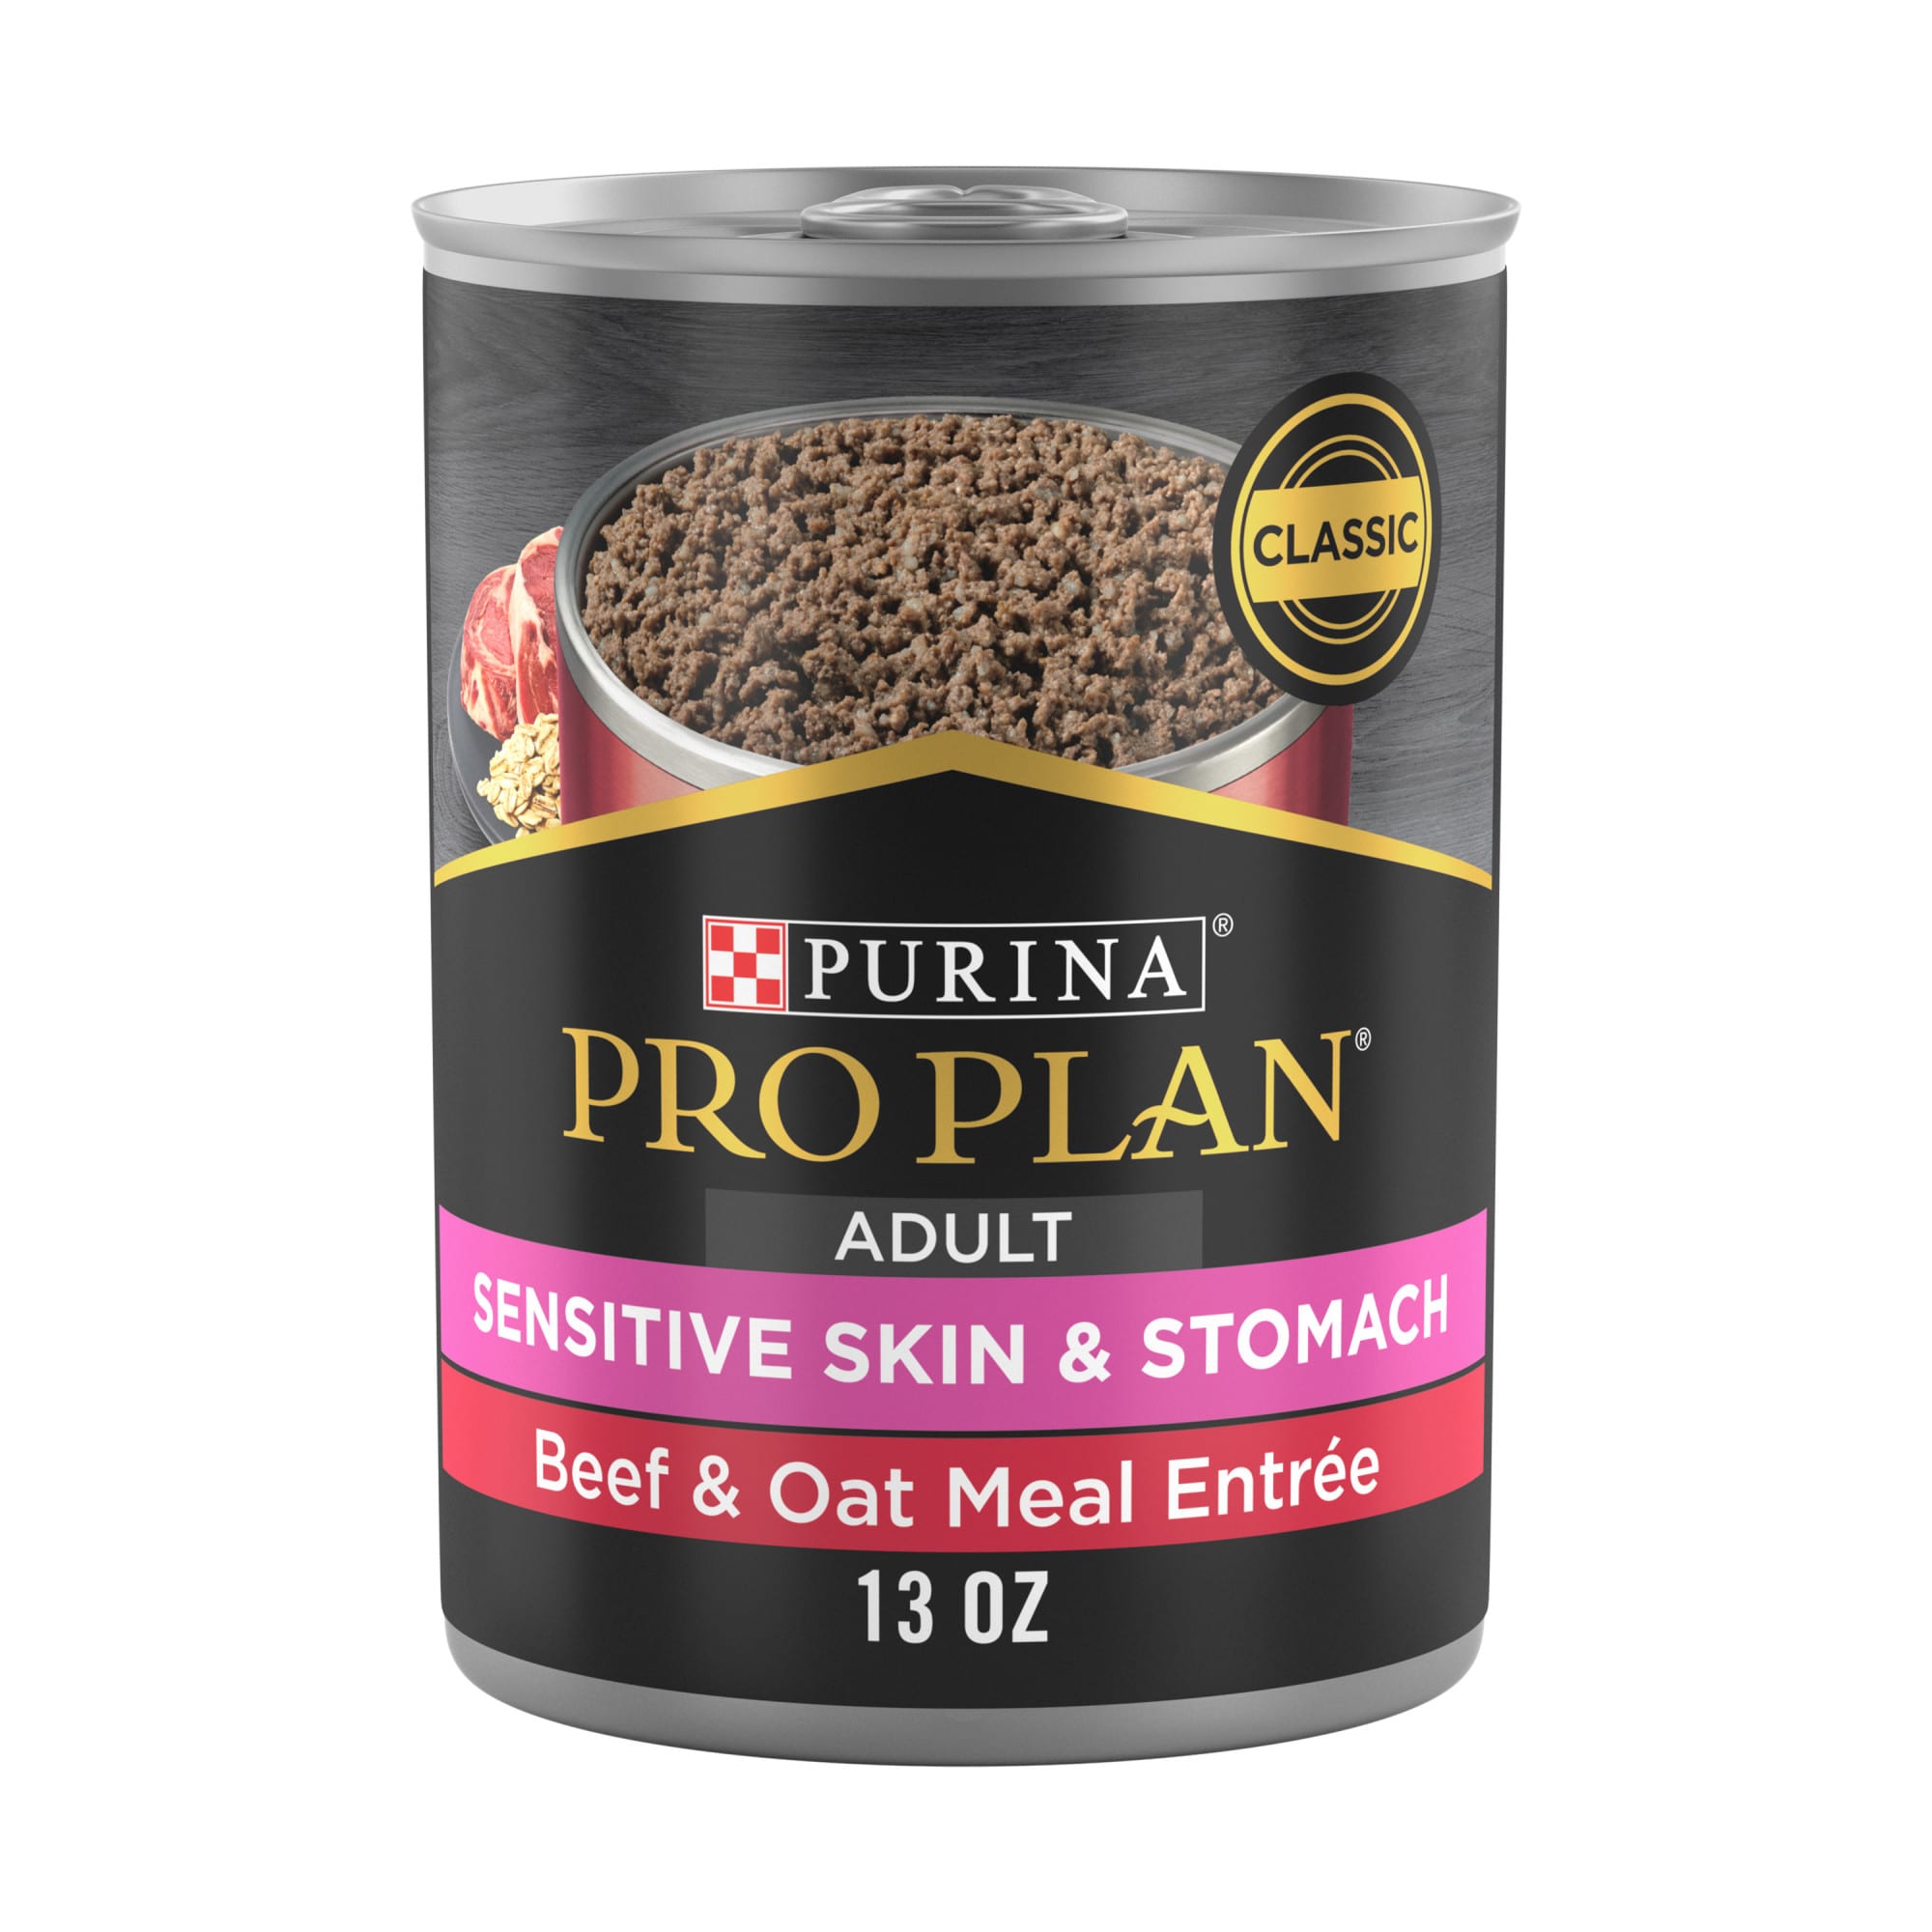 Purina Pro Plan Sensitive Skin and Stomach, Beef and Oat Meal Entree ...